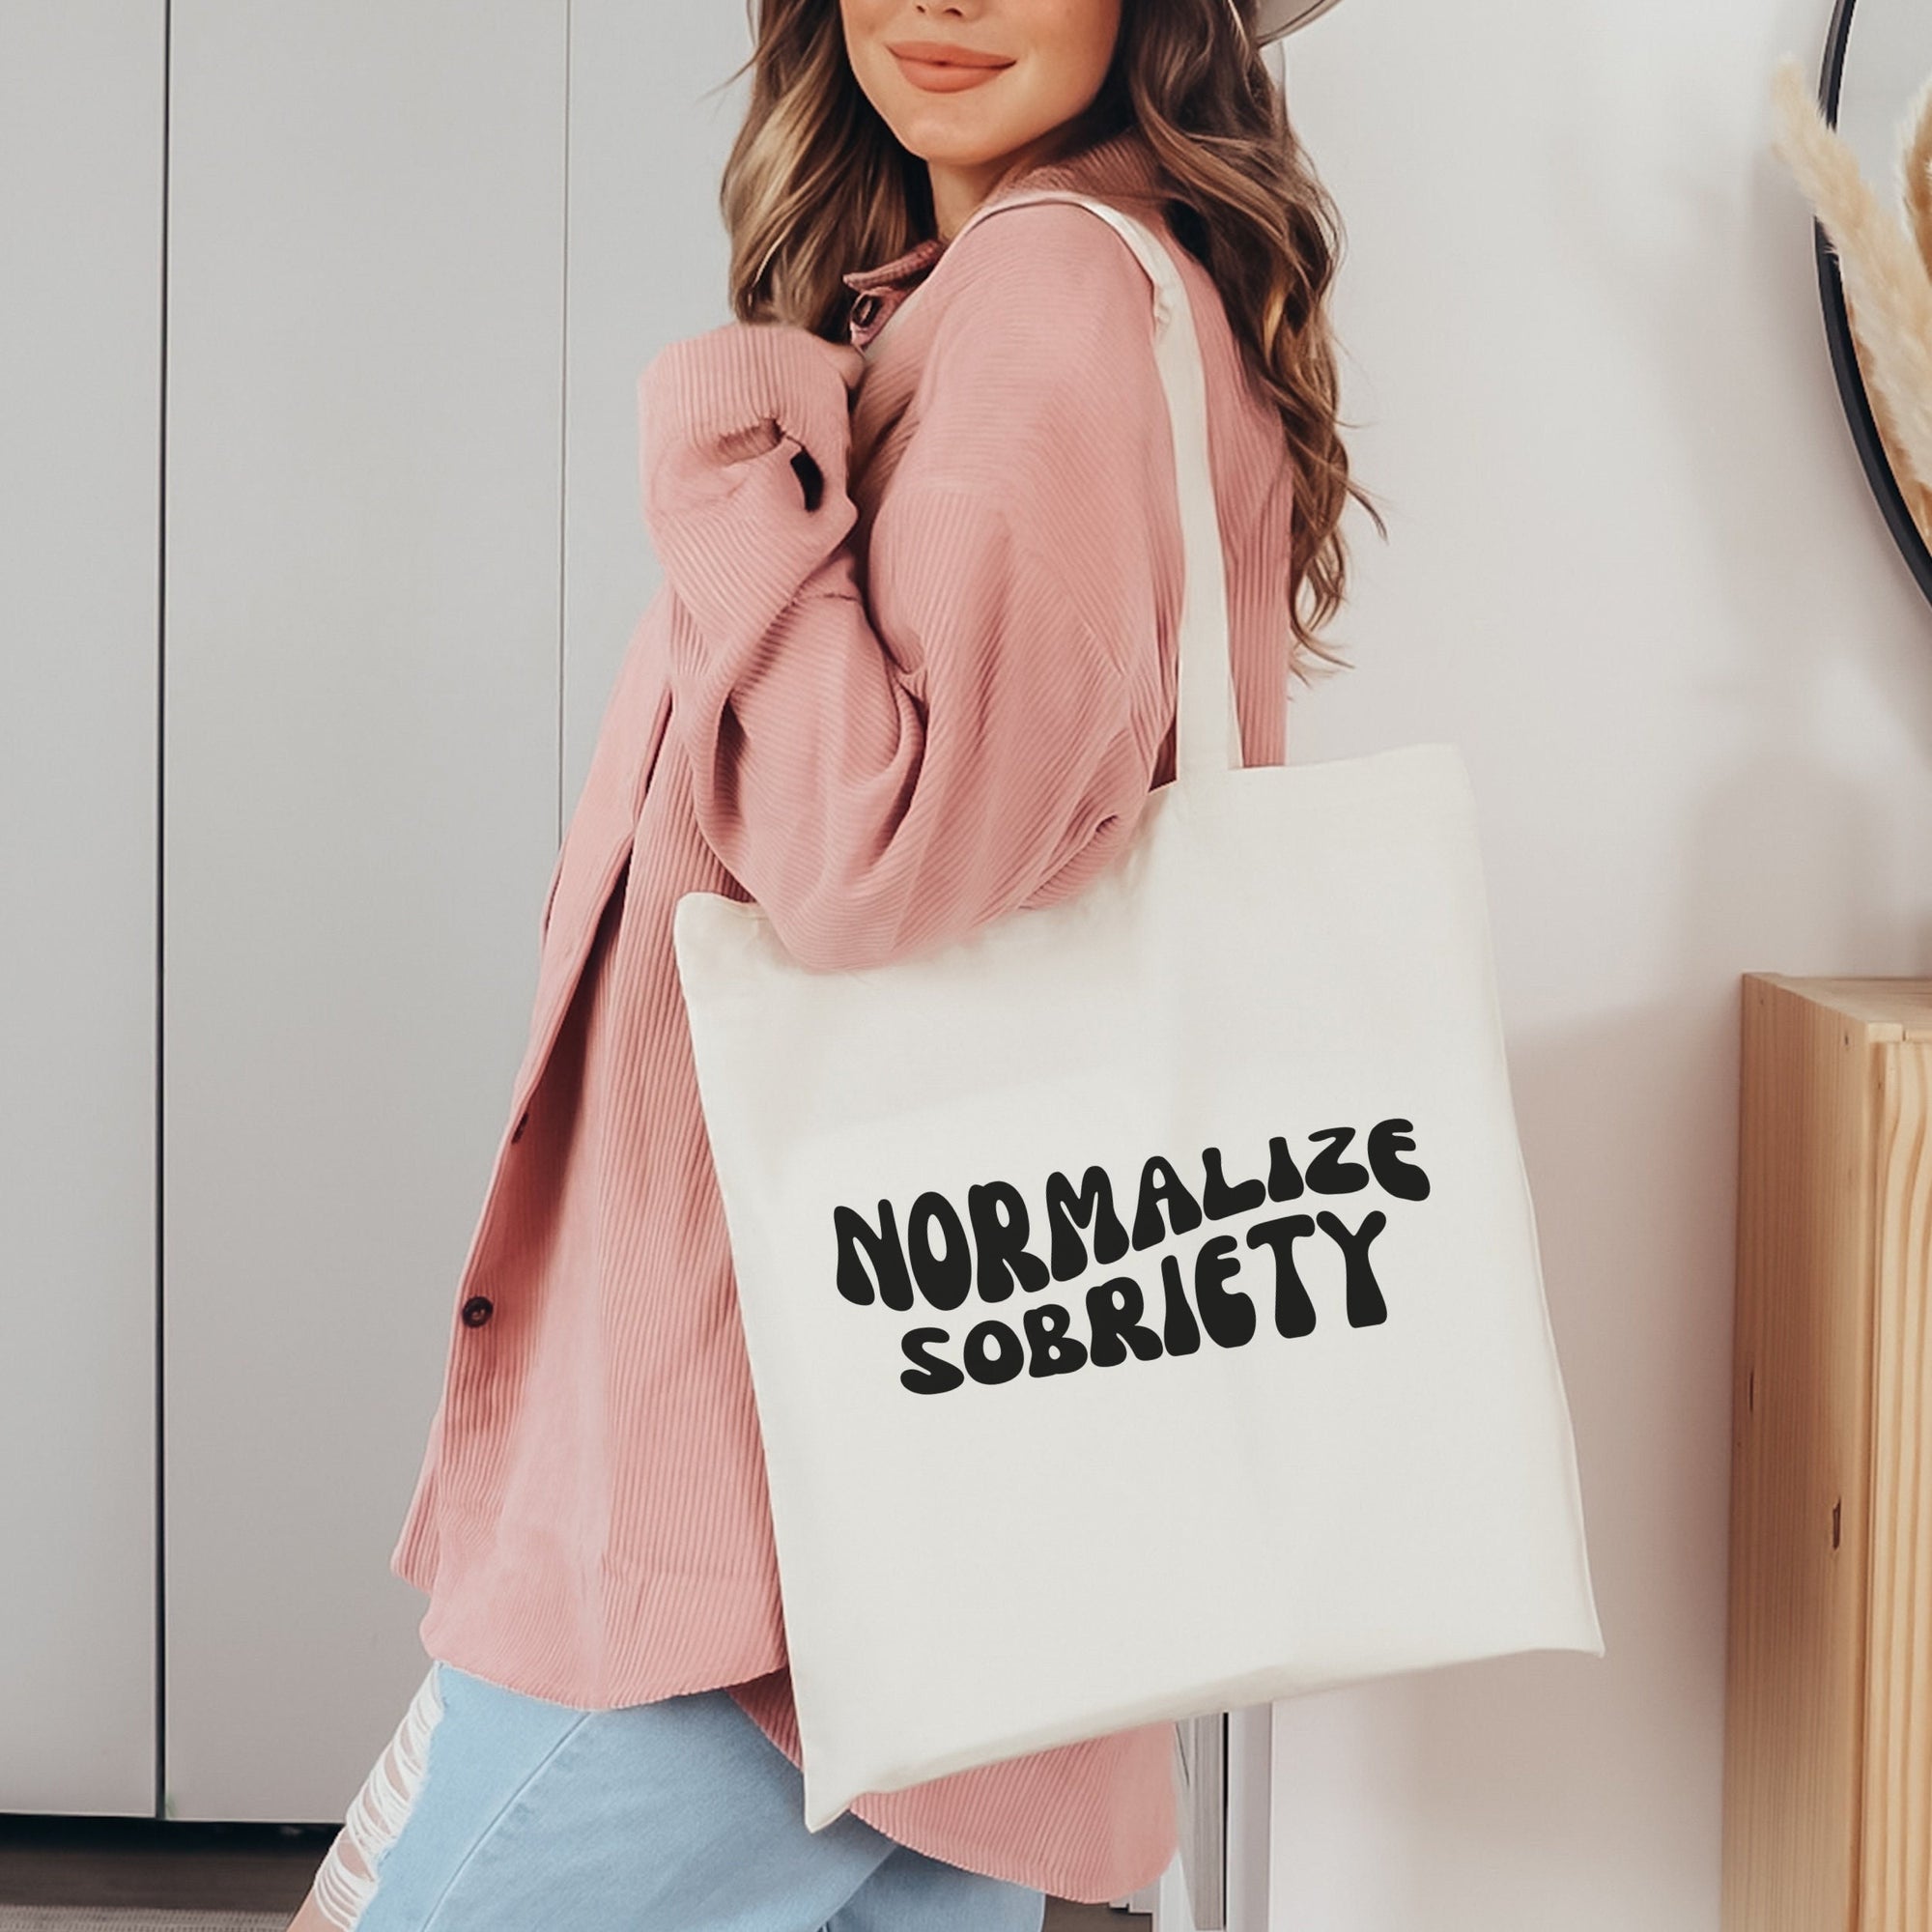 Normalize Sobriety Tote Bag